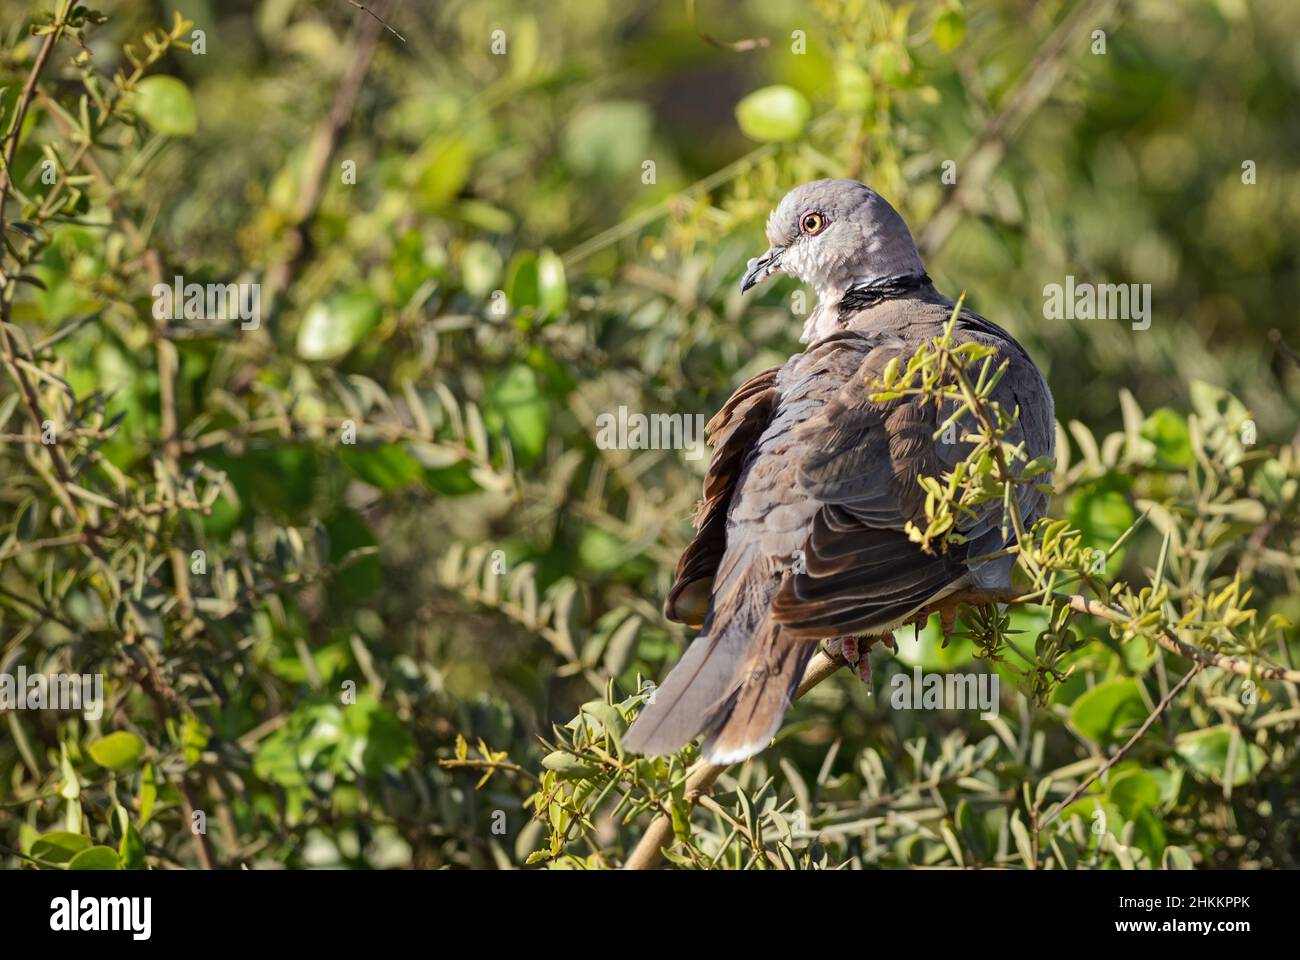 Mourning Collared Dove - Streptopelia decipiens, beautiful common dove from African woodlands and gardens, Amboseli, Kenya. Stock Photo